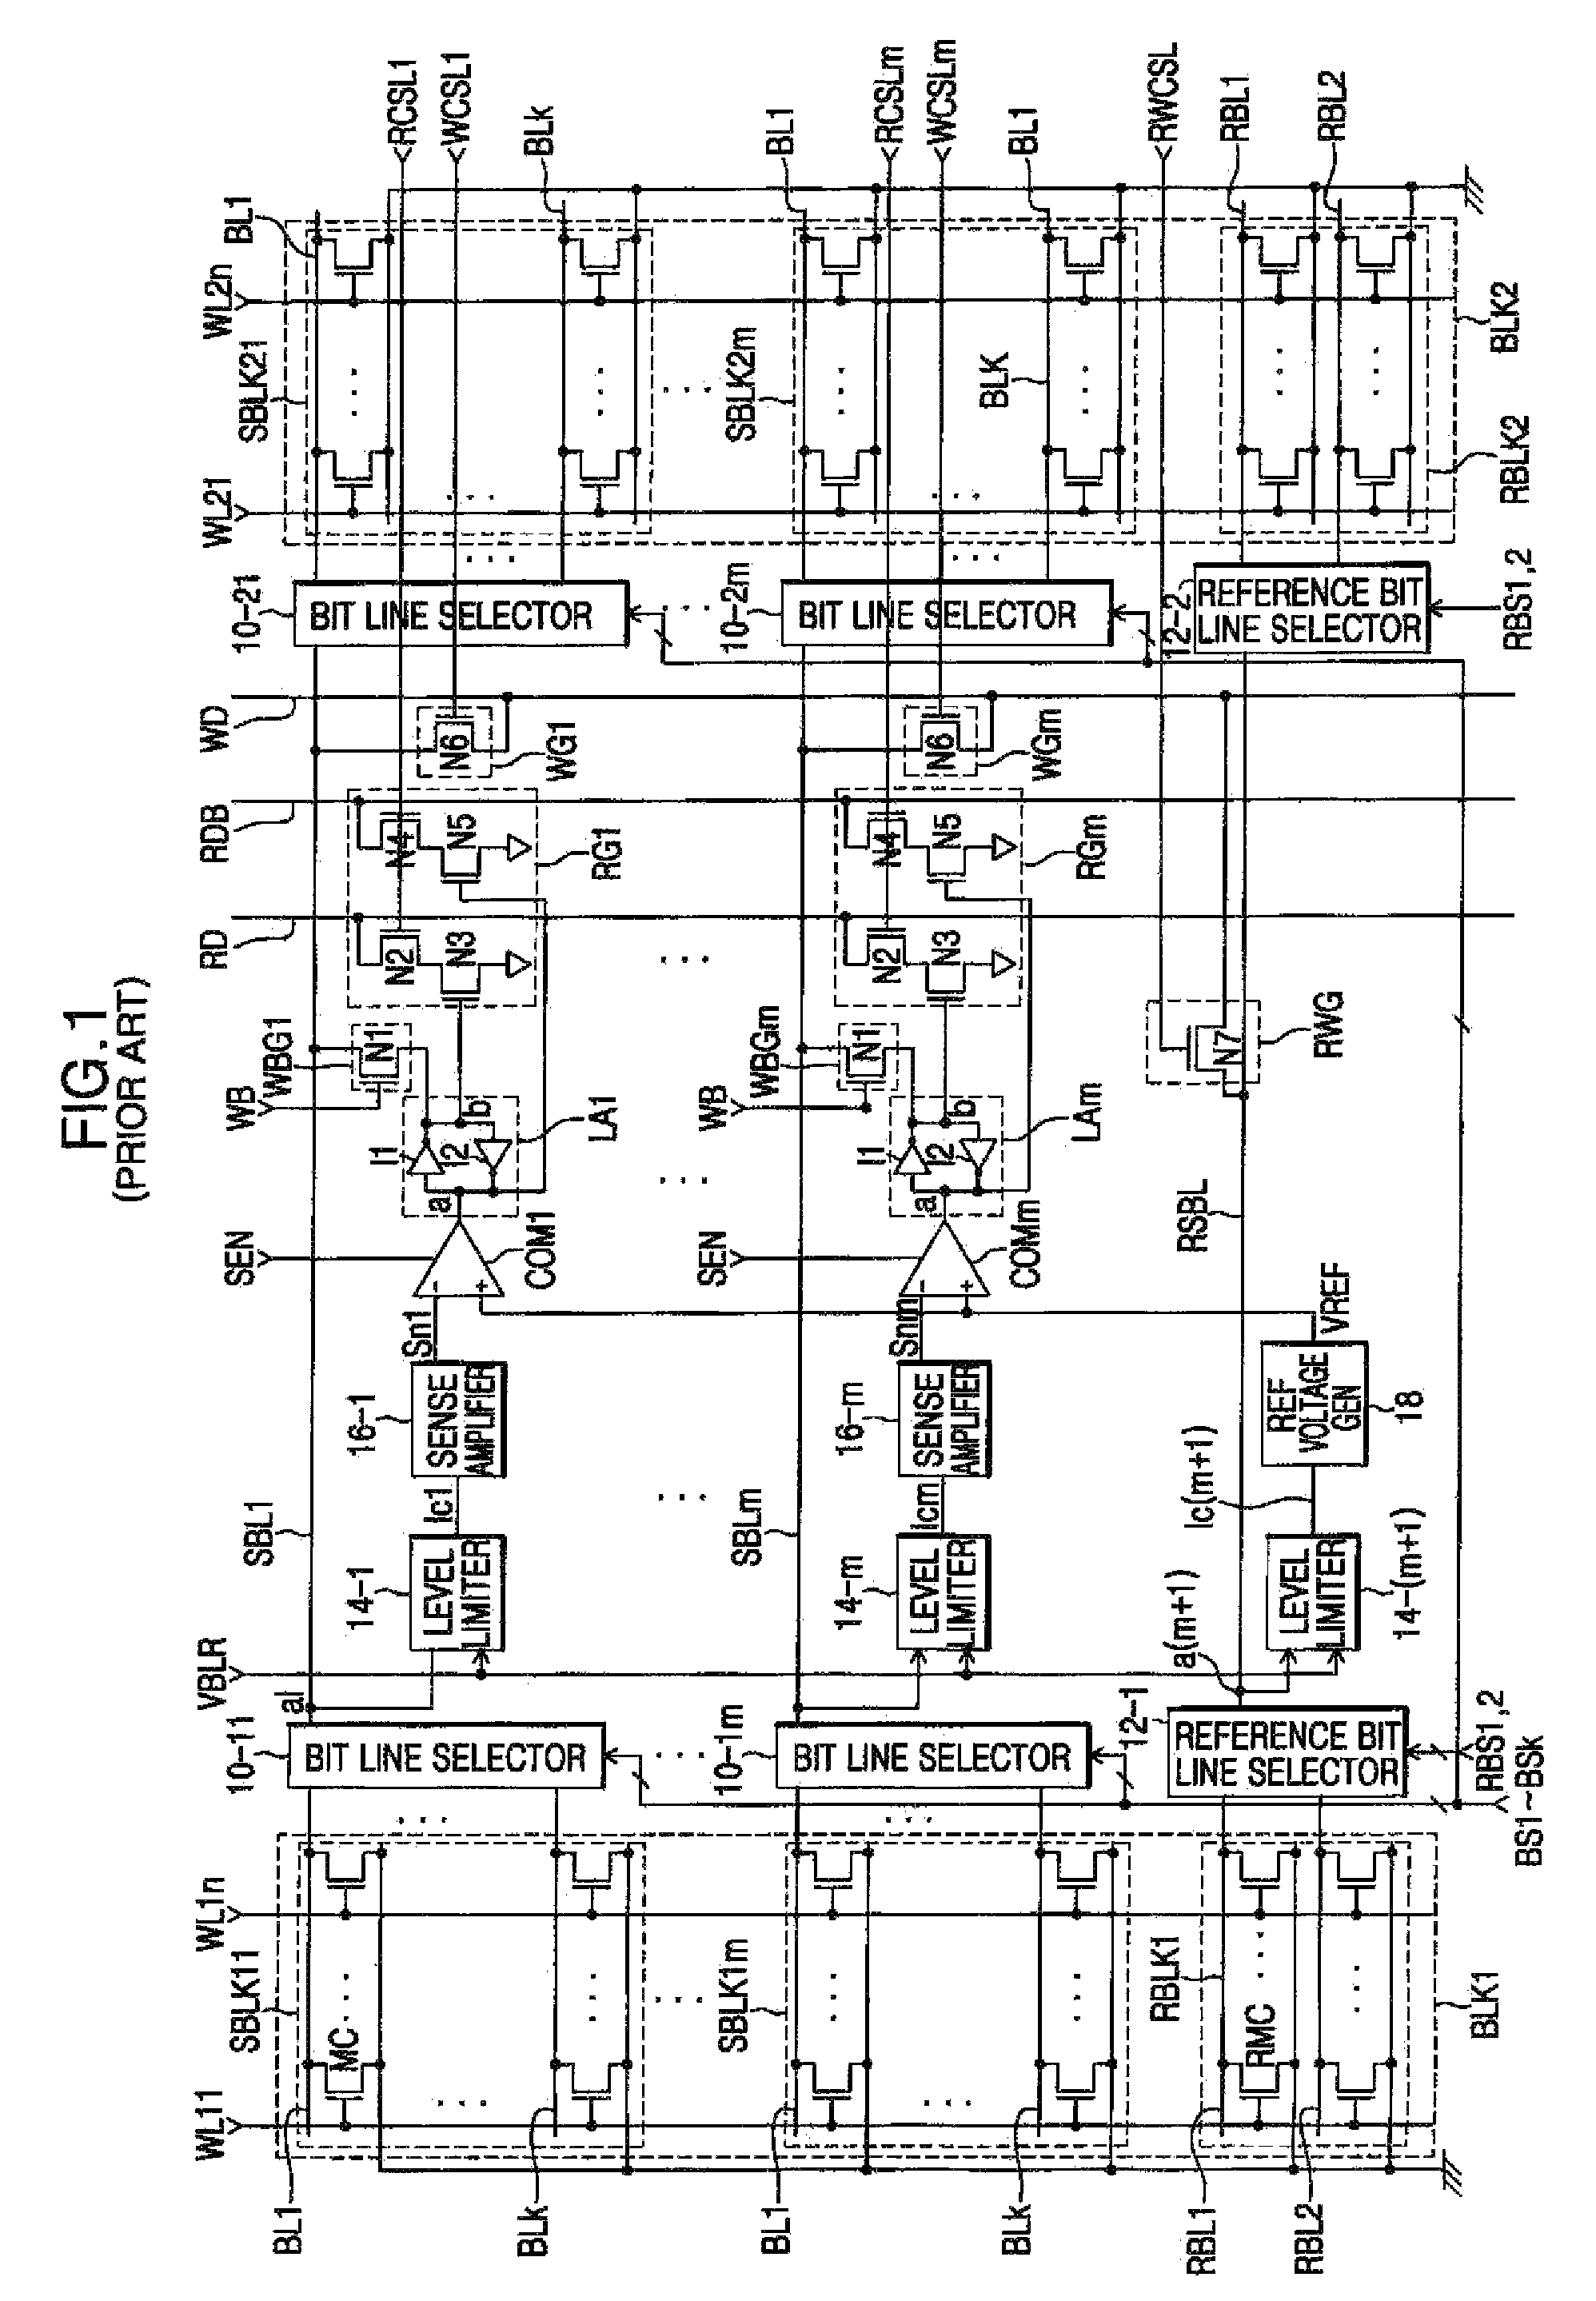 Semiconductor memory device including floating body memory cells and method of operating the same